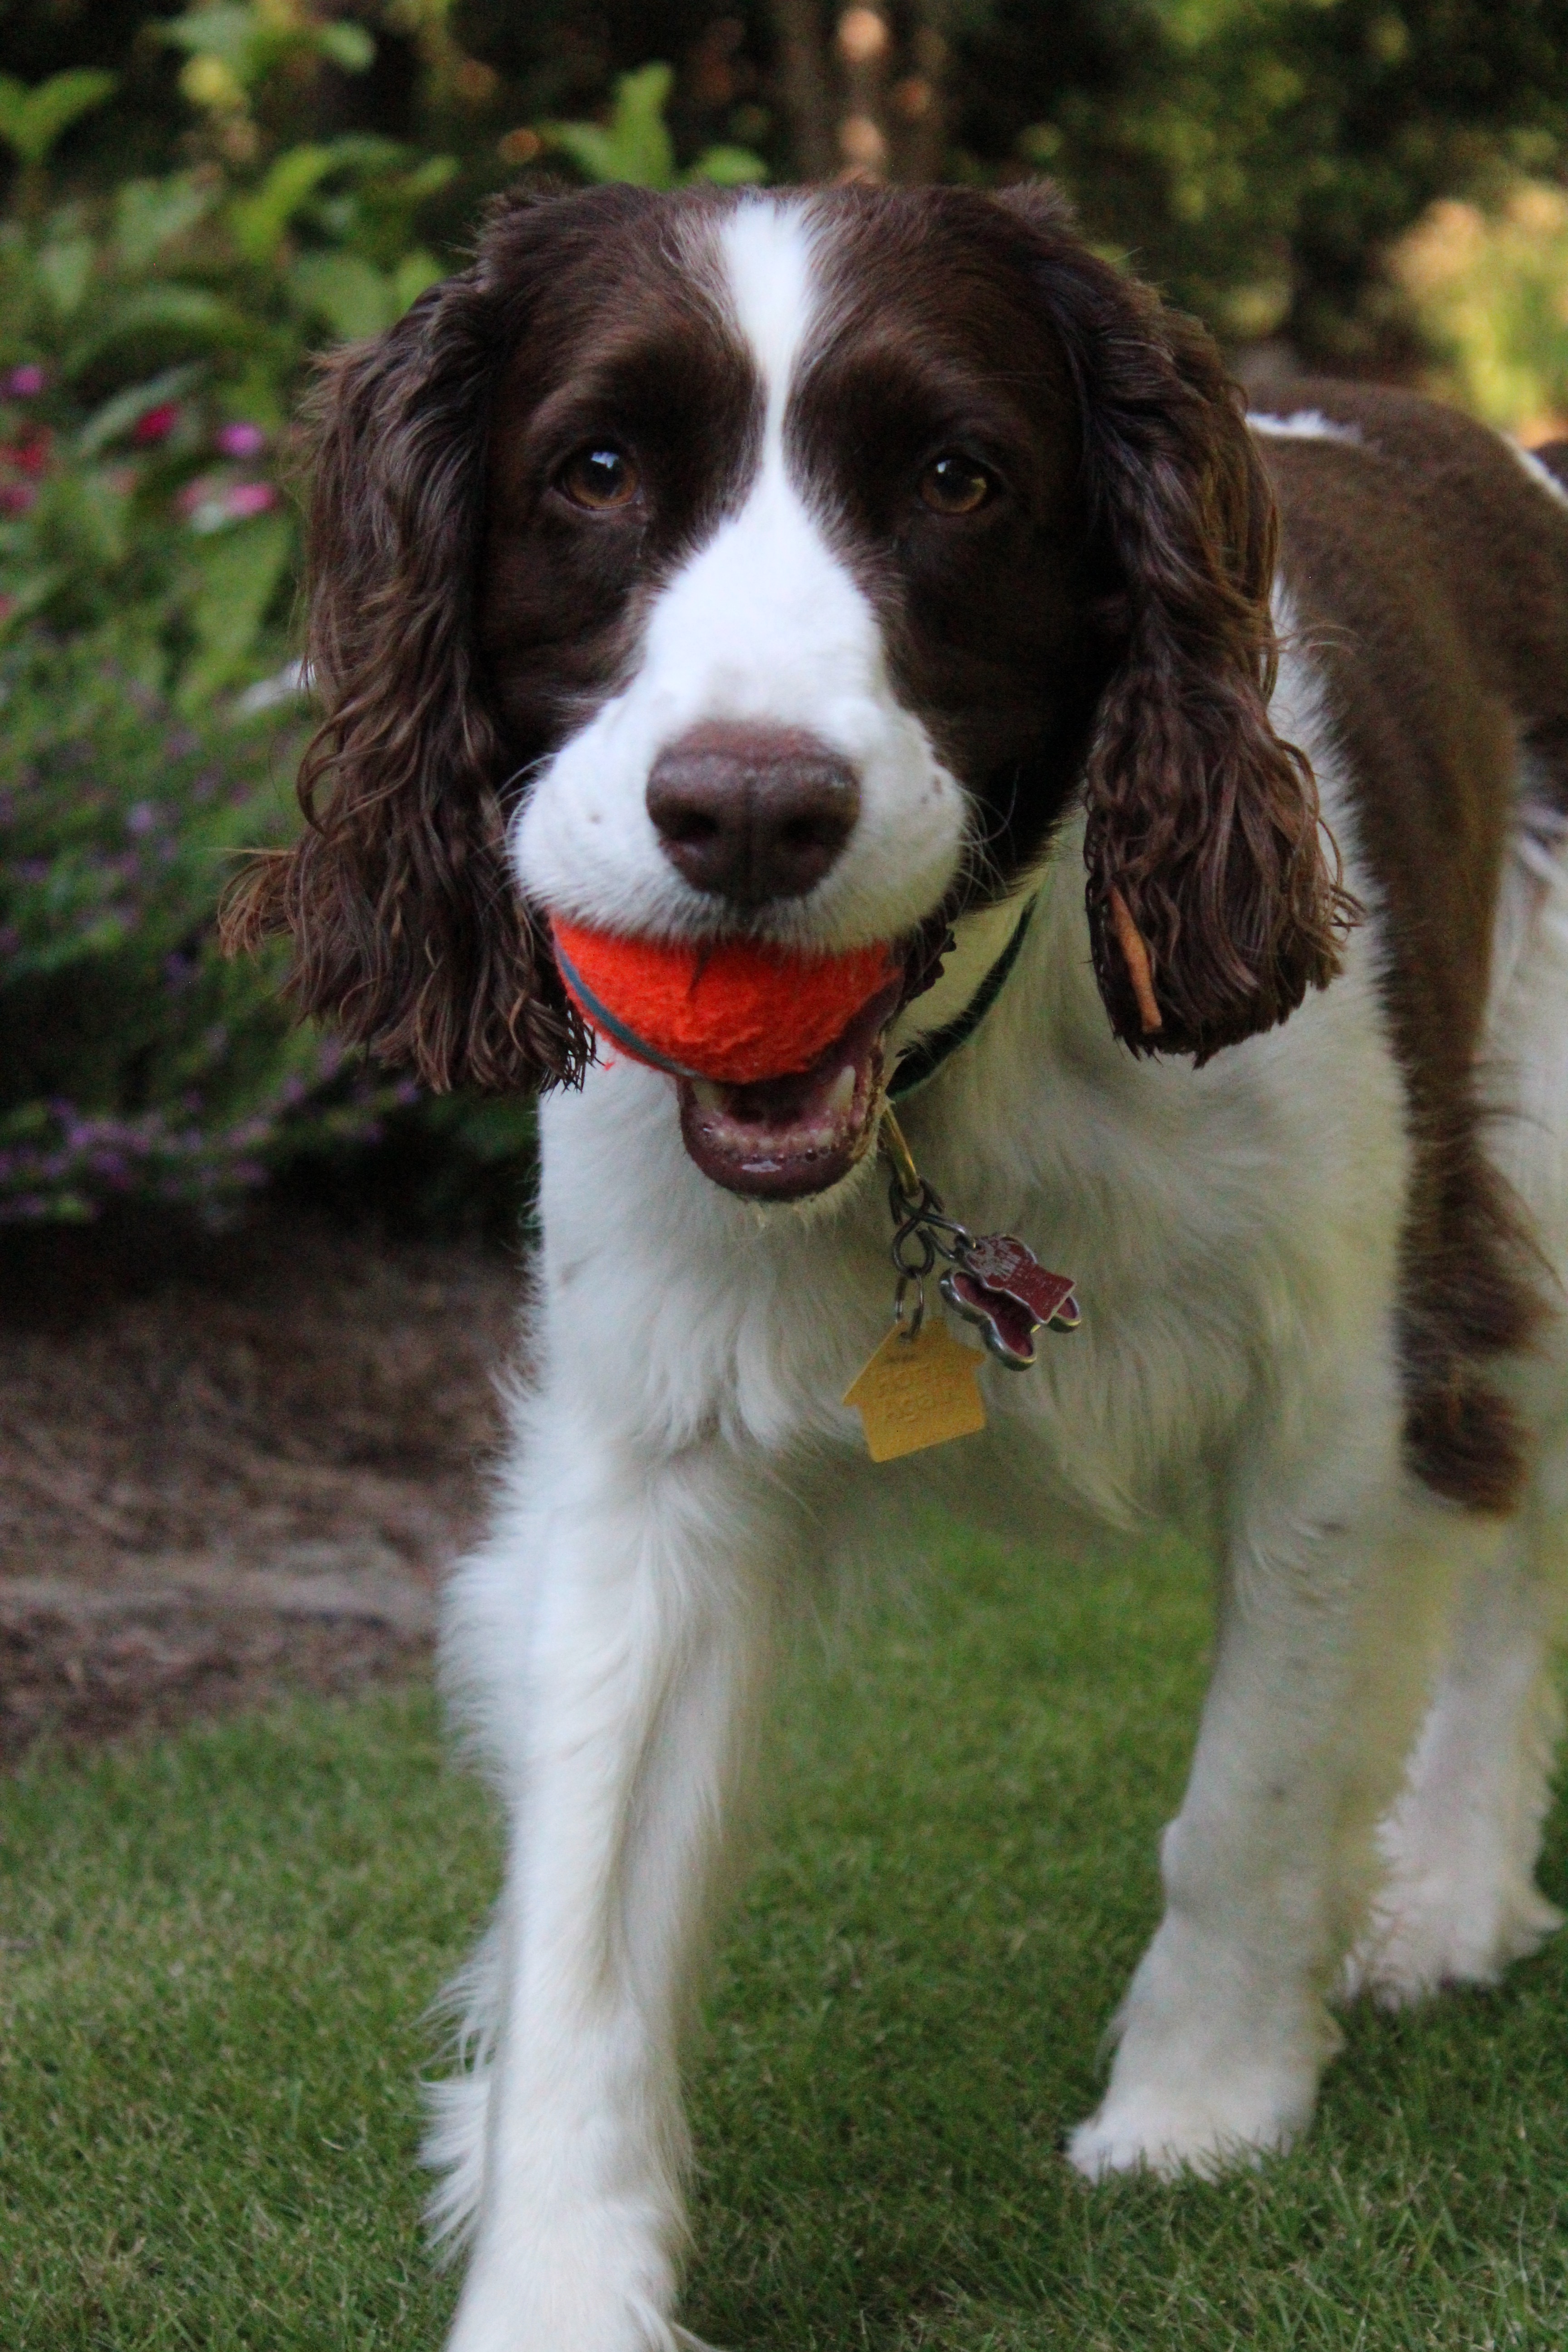 A dog named Maggie playing fetch with her ball.